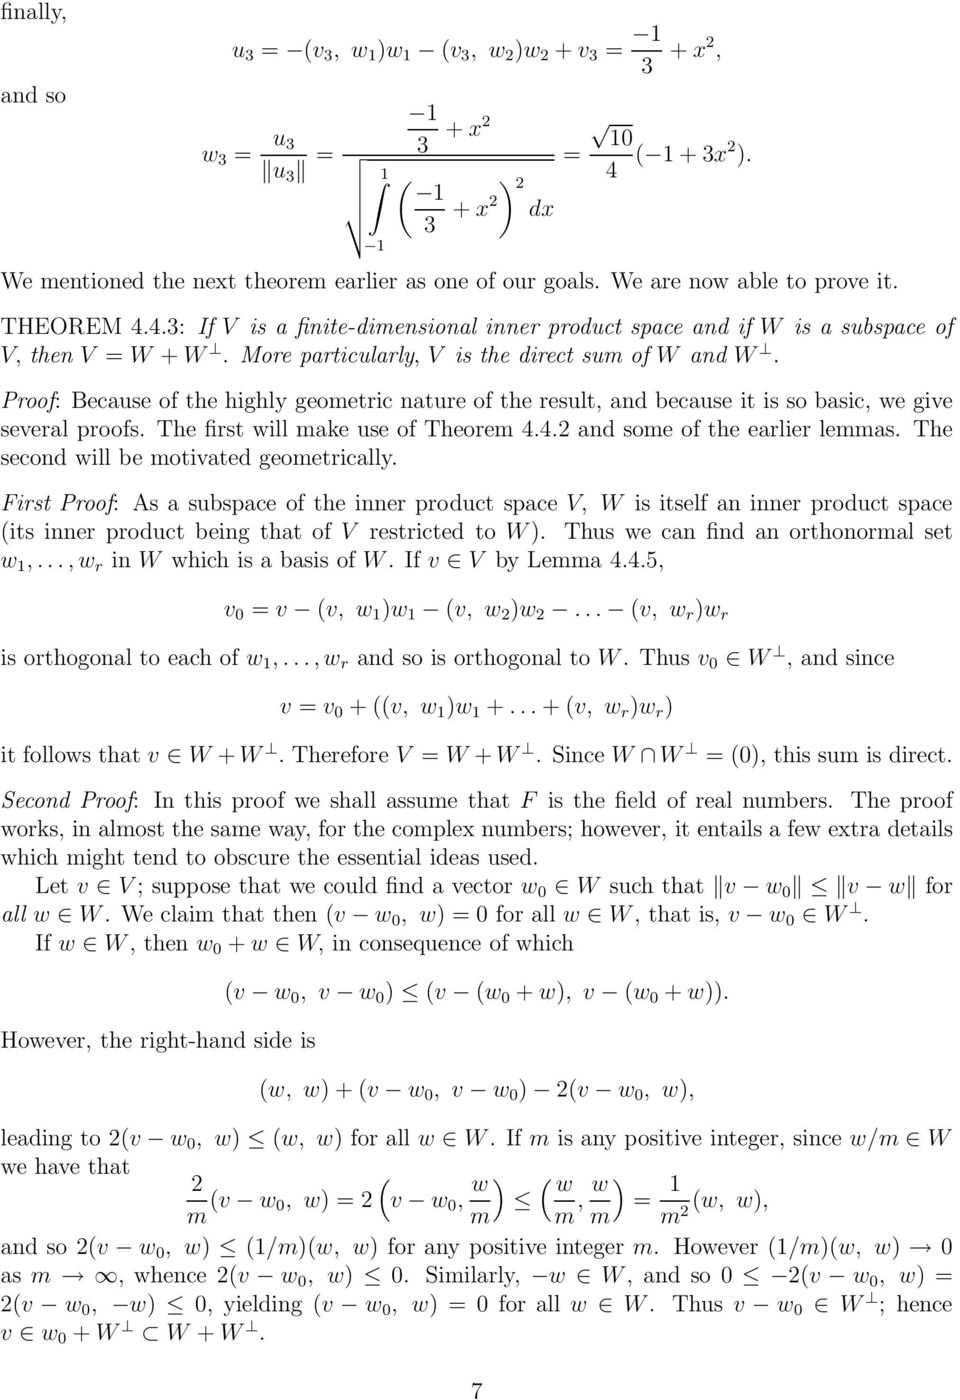 Proof: Because of the highly geometric nature of the result, and because it is so basic, we give several proofs. The first will make use of Theorem 4.4.2 and some of the earlier lemmas.